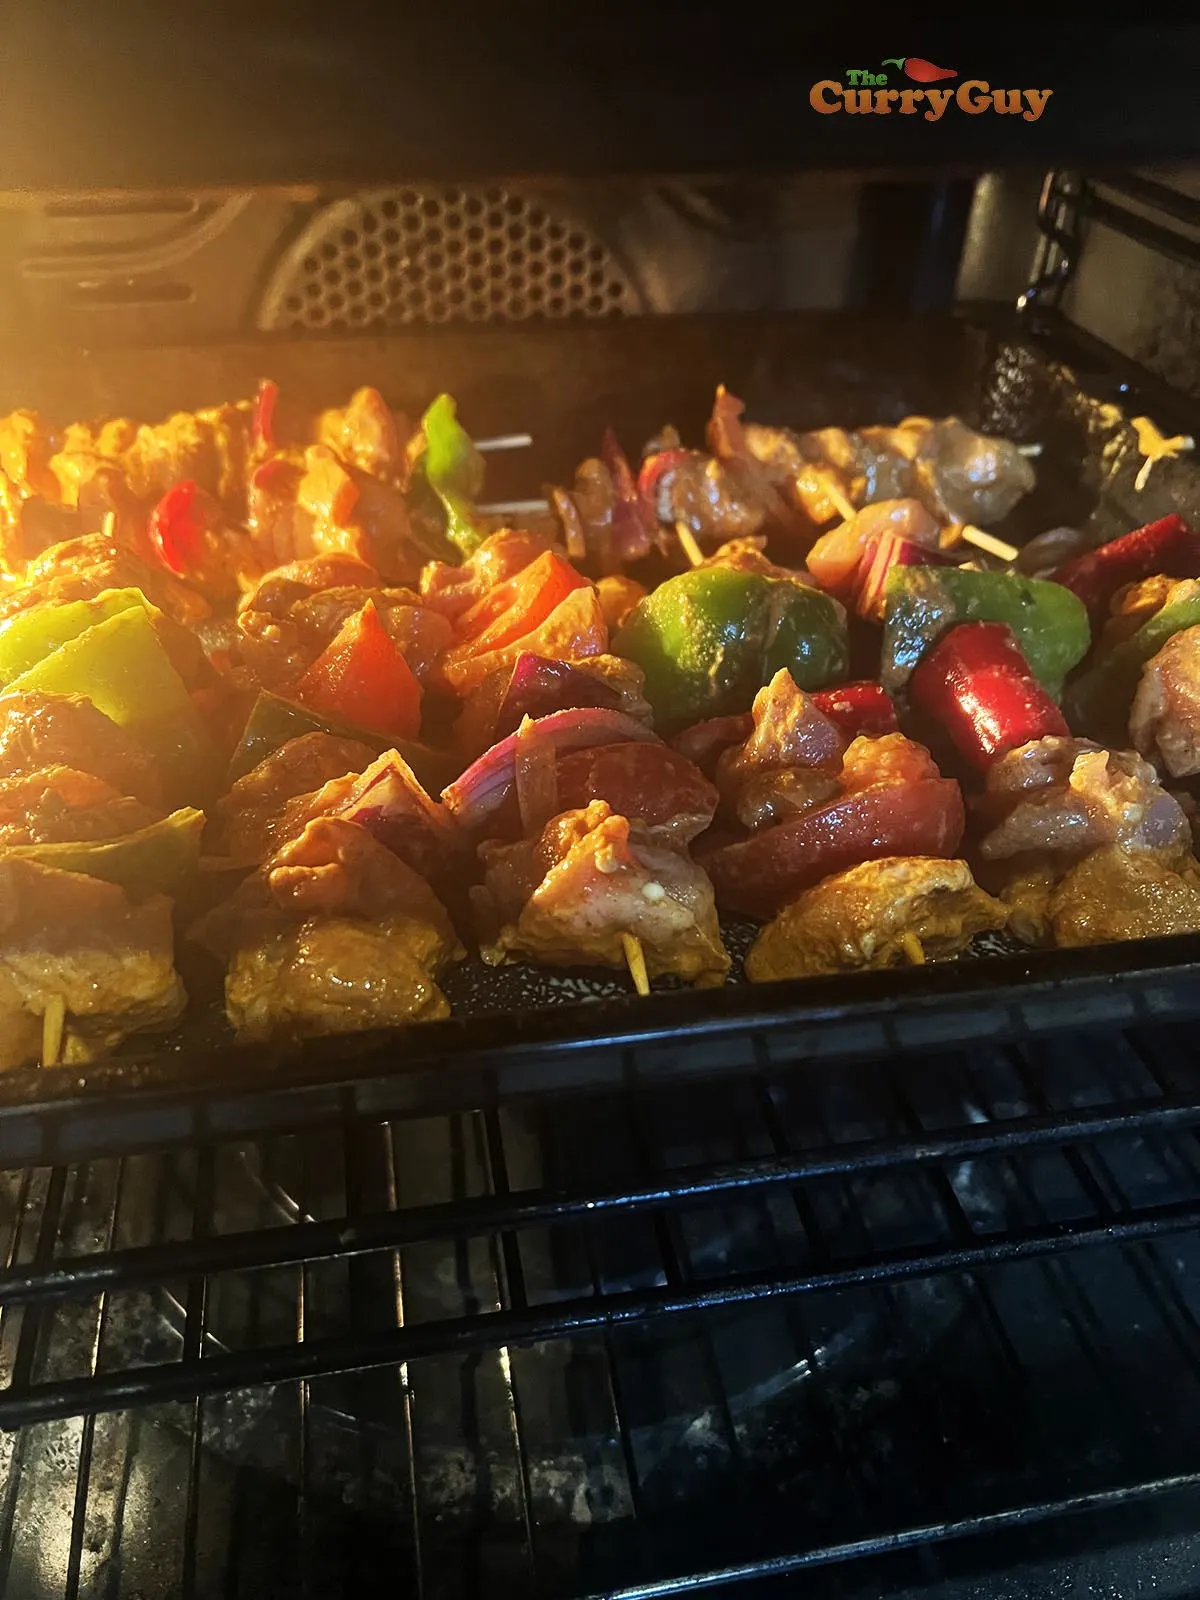 Chicken tikka and vegetables in the oven.